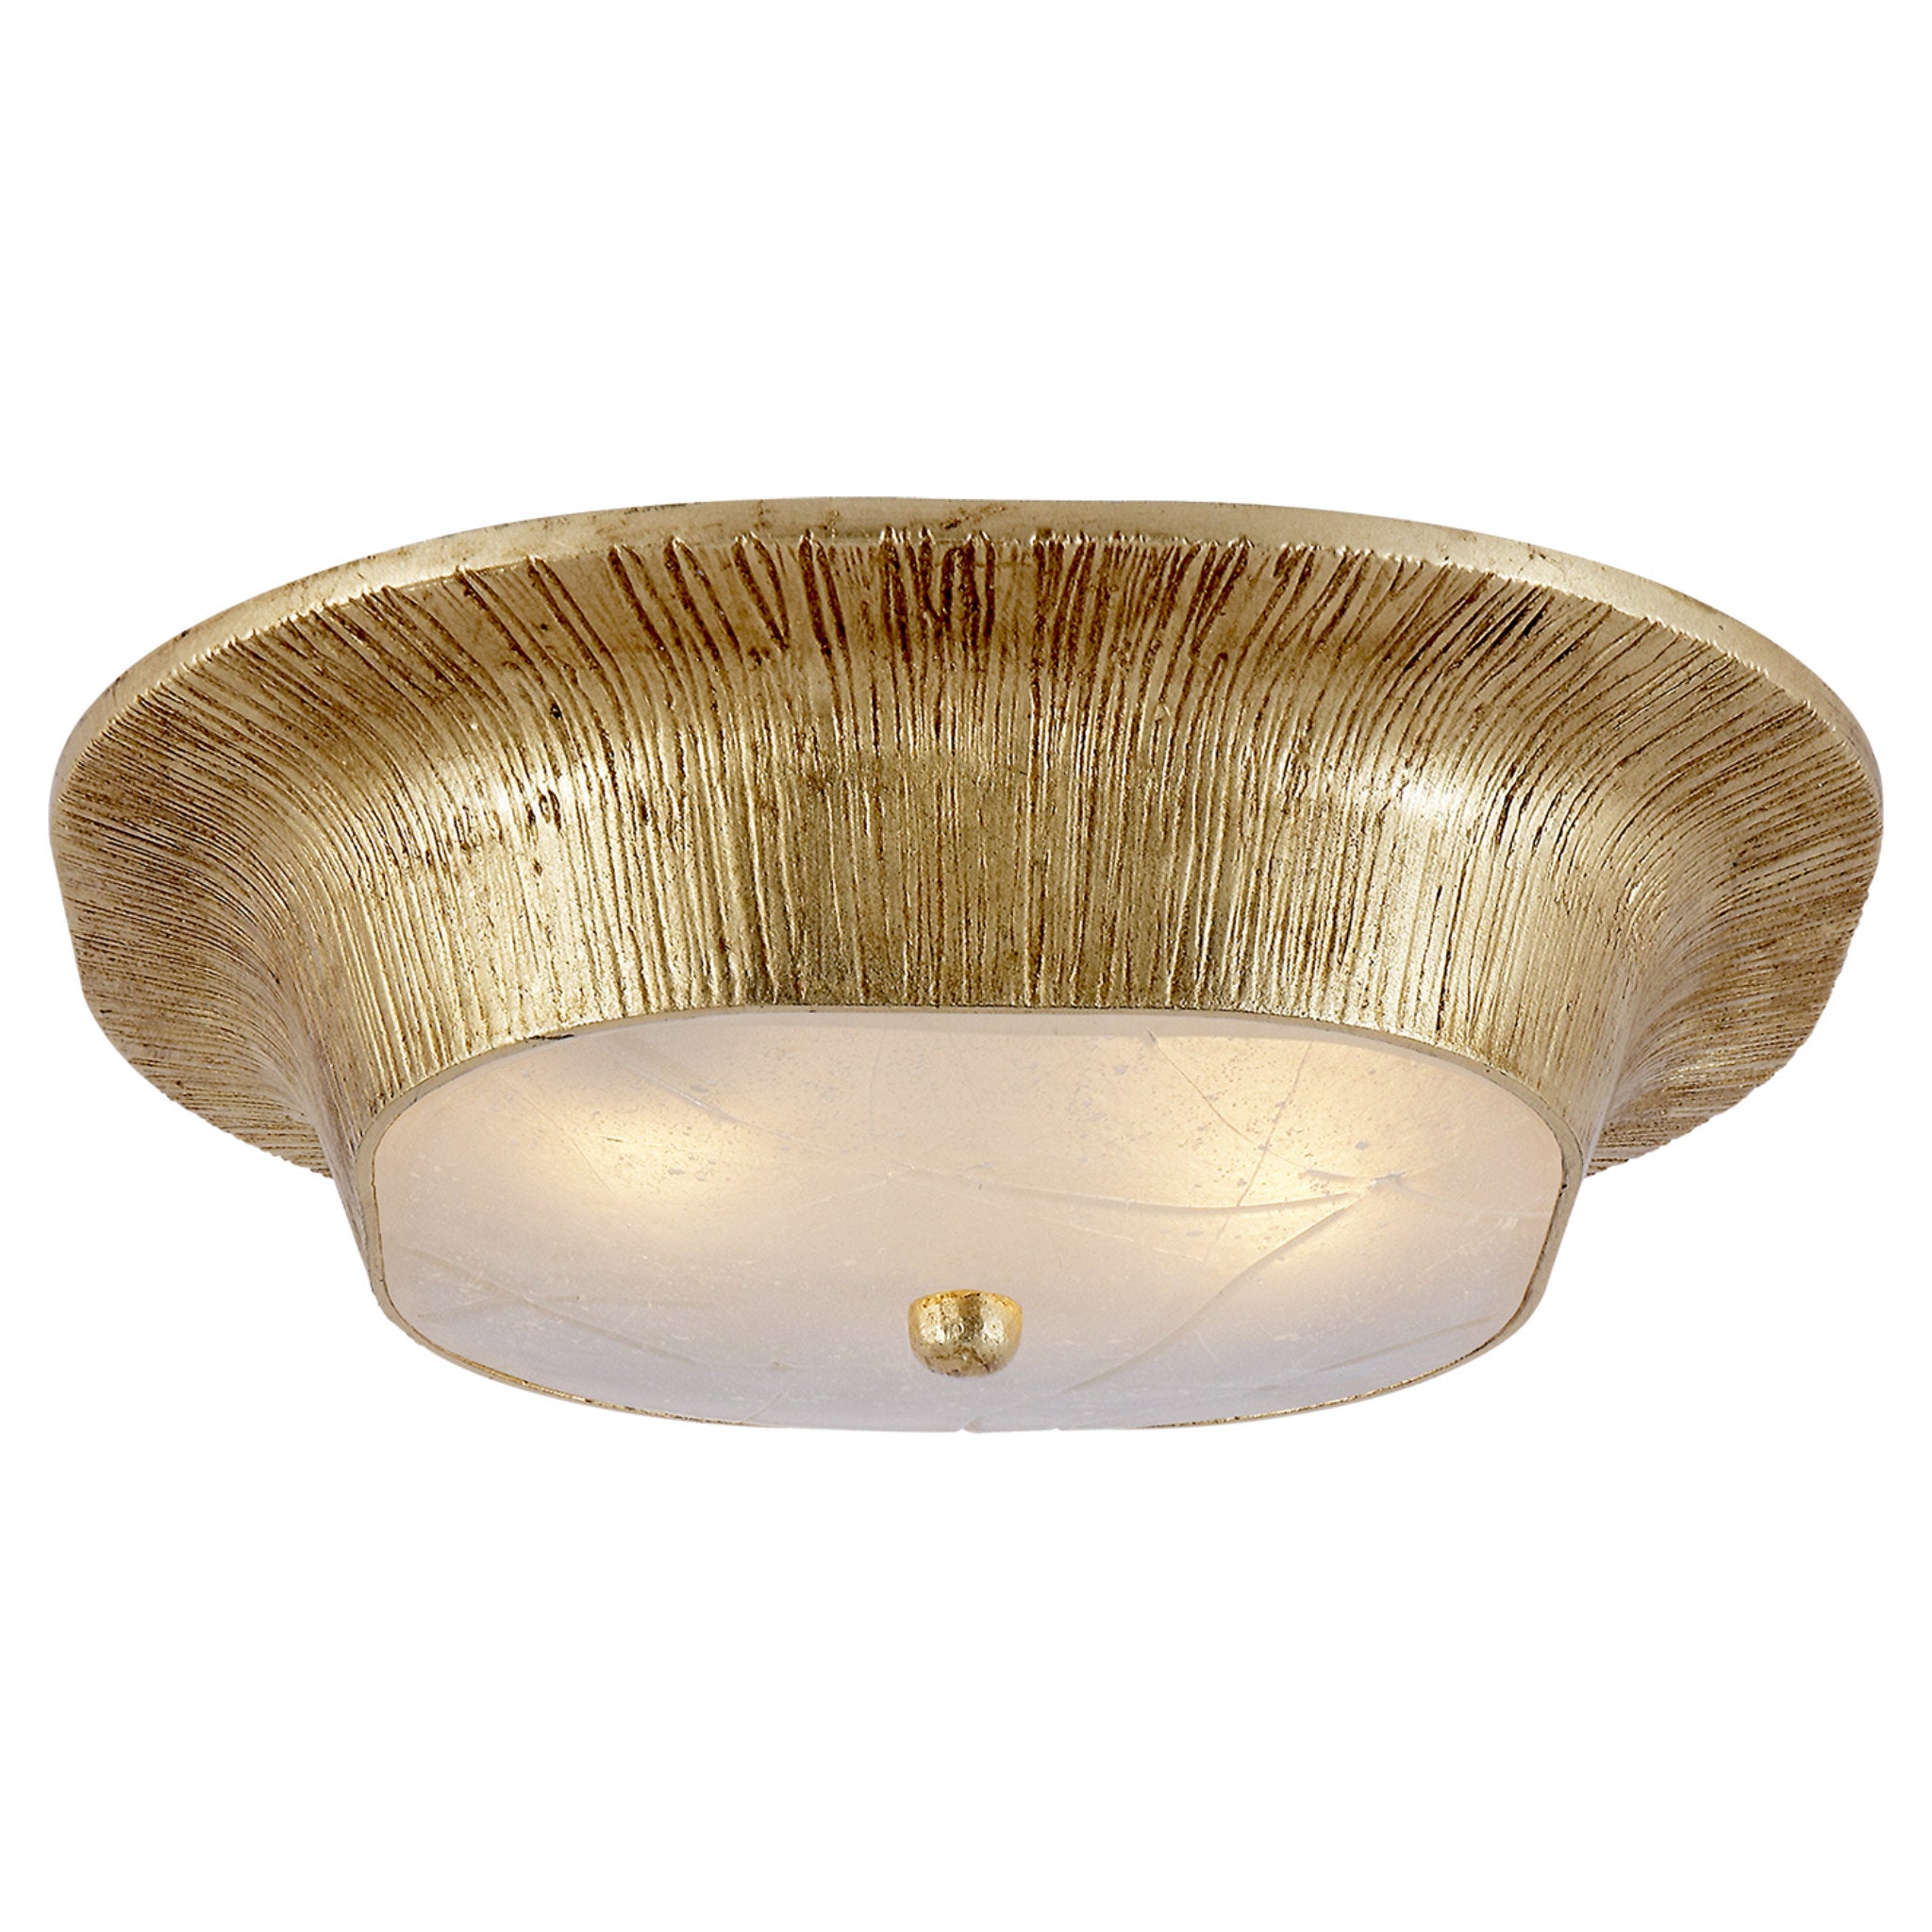 Kelly Wearstler Utopia Round Flush Mount in Gild with Fractured Glass